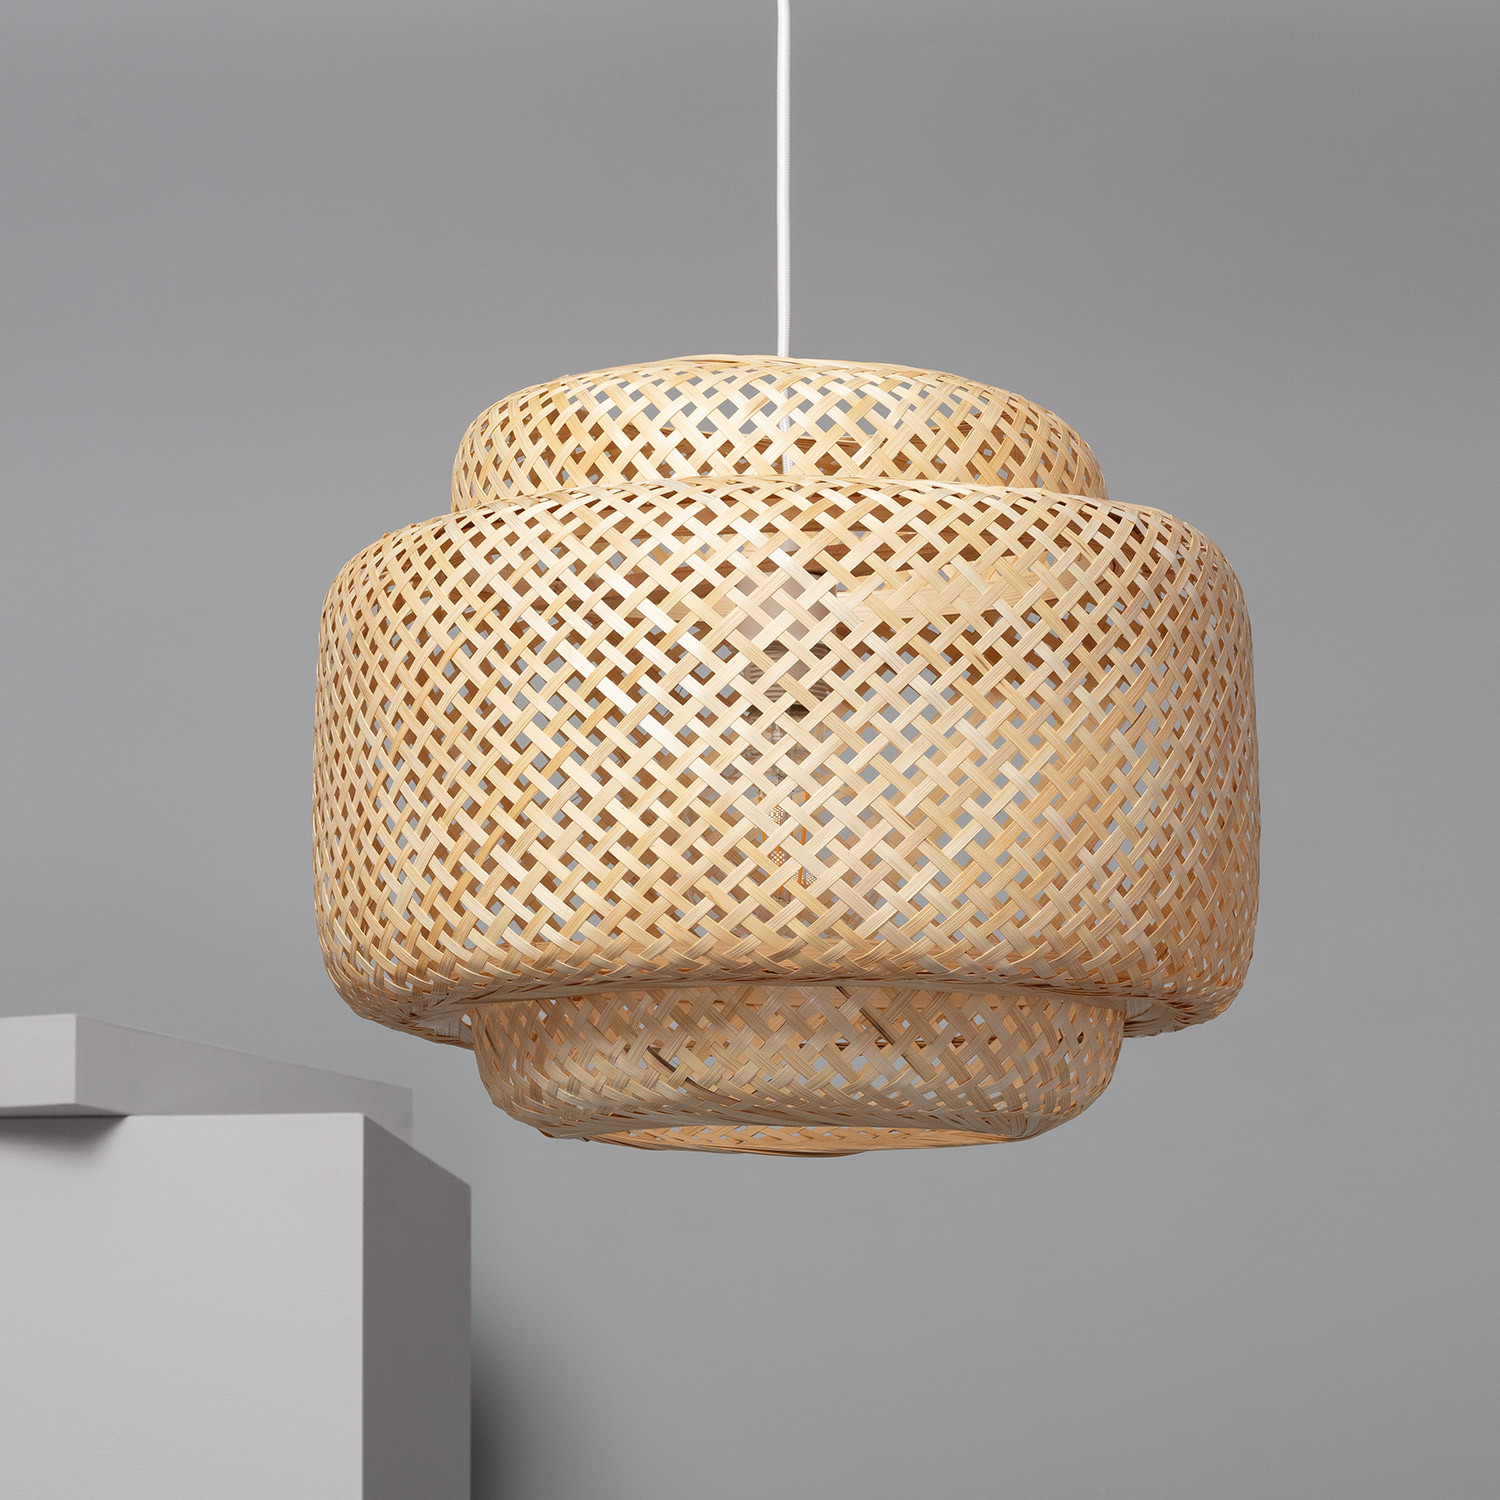 Galax Adjustable Handmade Bamboo Contemporary Farmhouse Rustic Celling  Hanging Wall Lamp Plug In Rattan Lantern Fixture With Wall Ceiling Mounted 